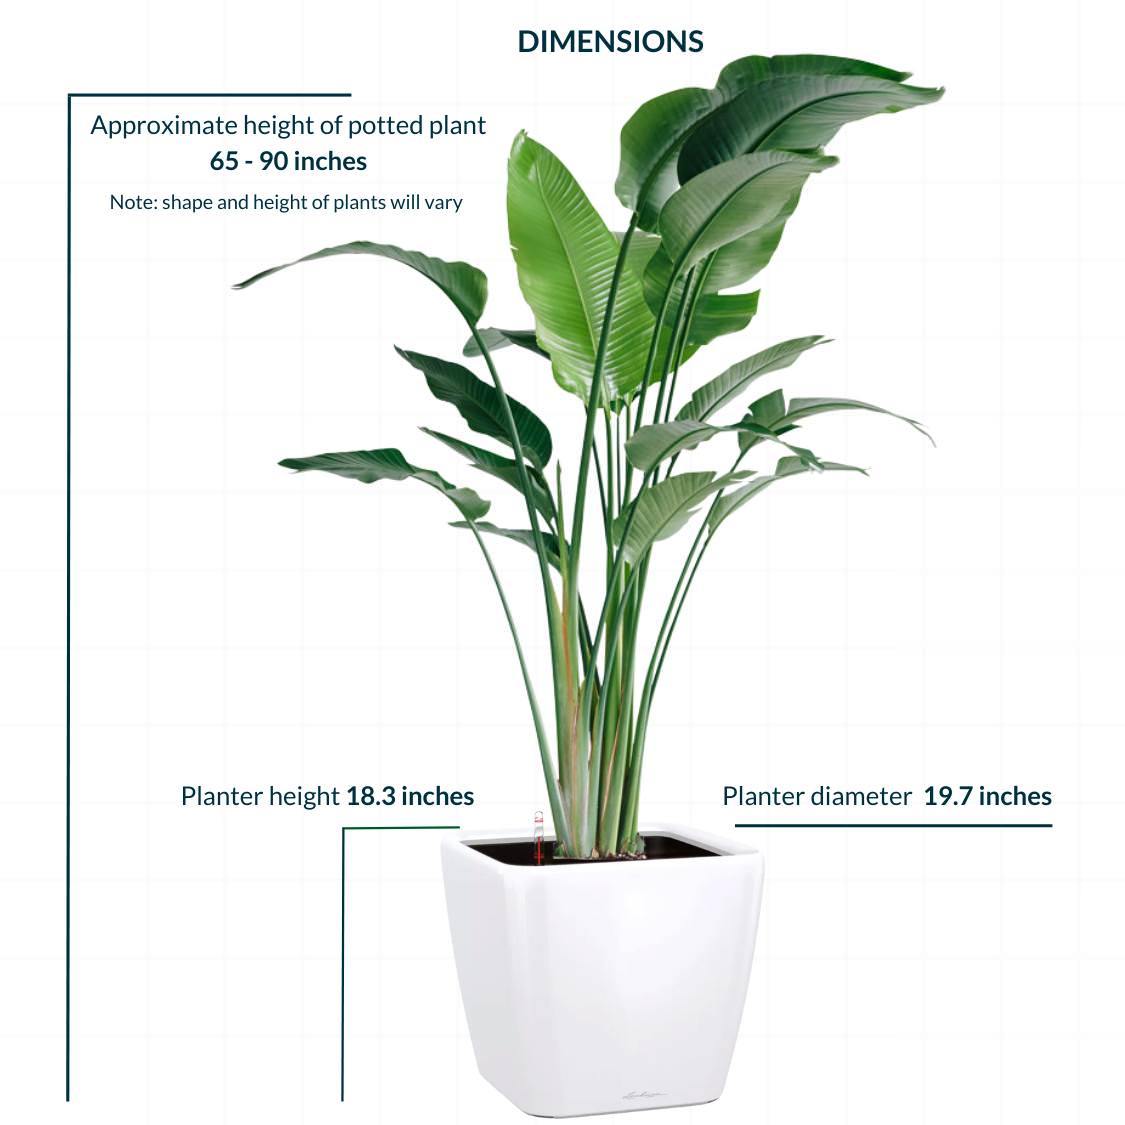 XL Bird of Paradise Plant Potted In Lechuza Quadro 50 Planter - White - My City Plants